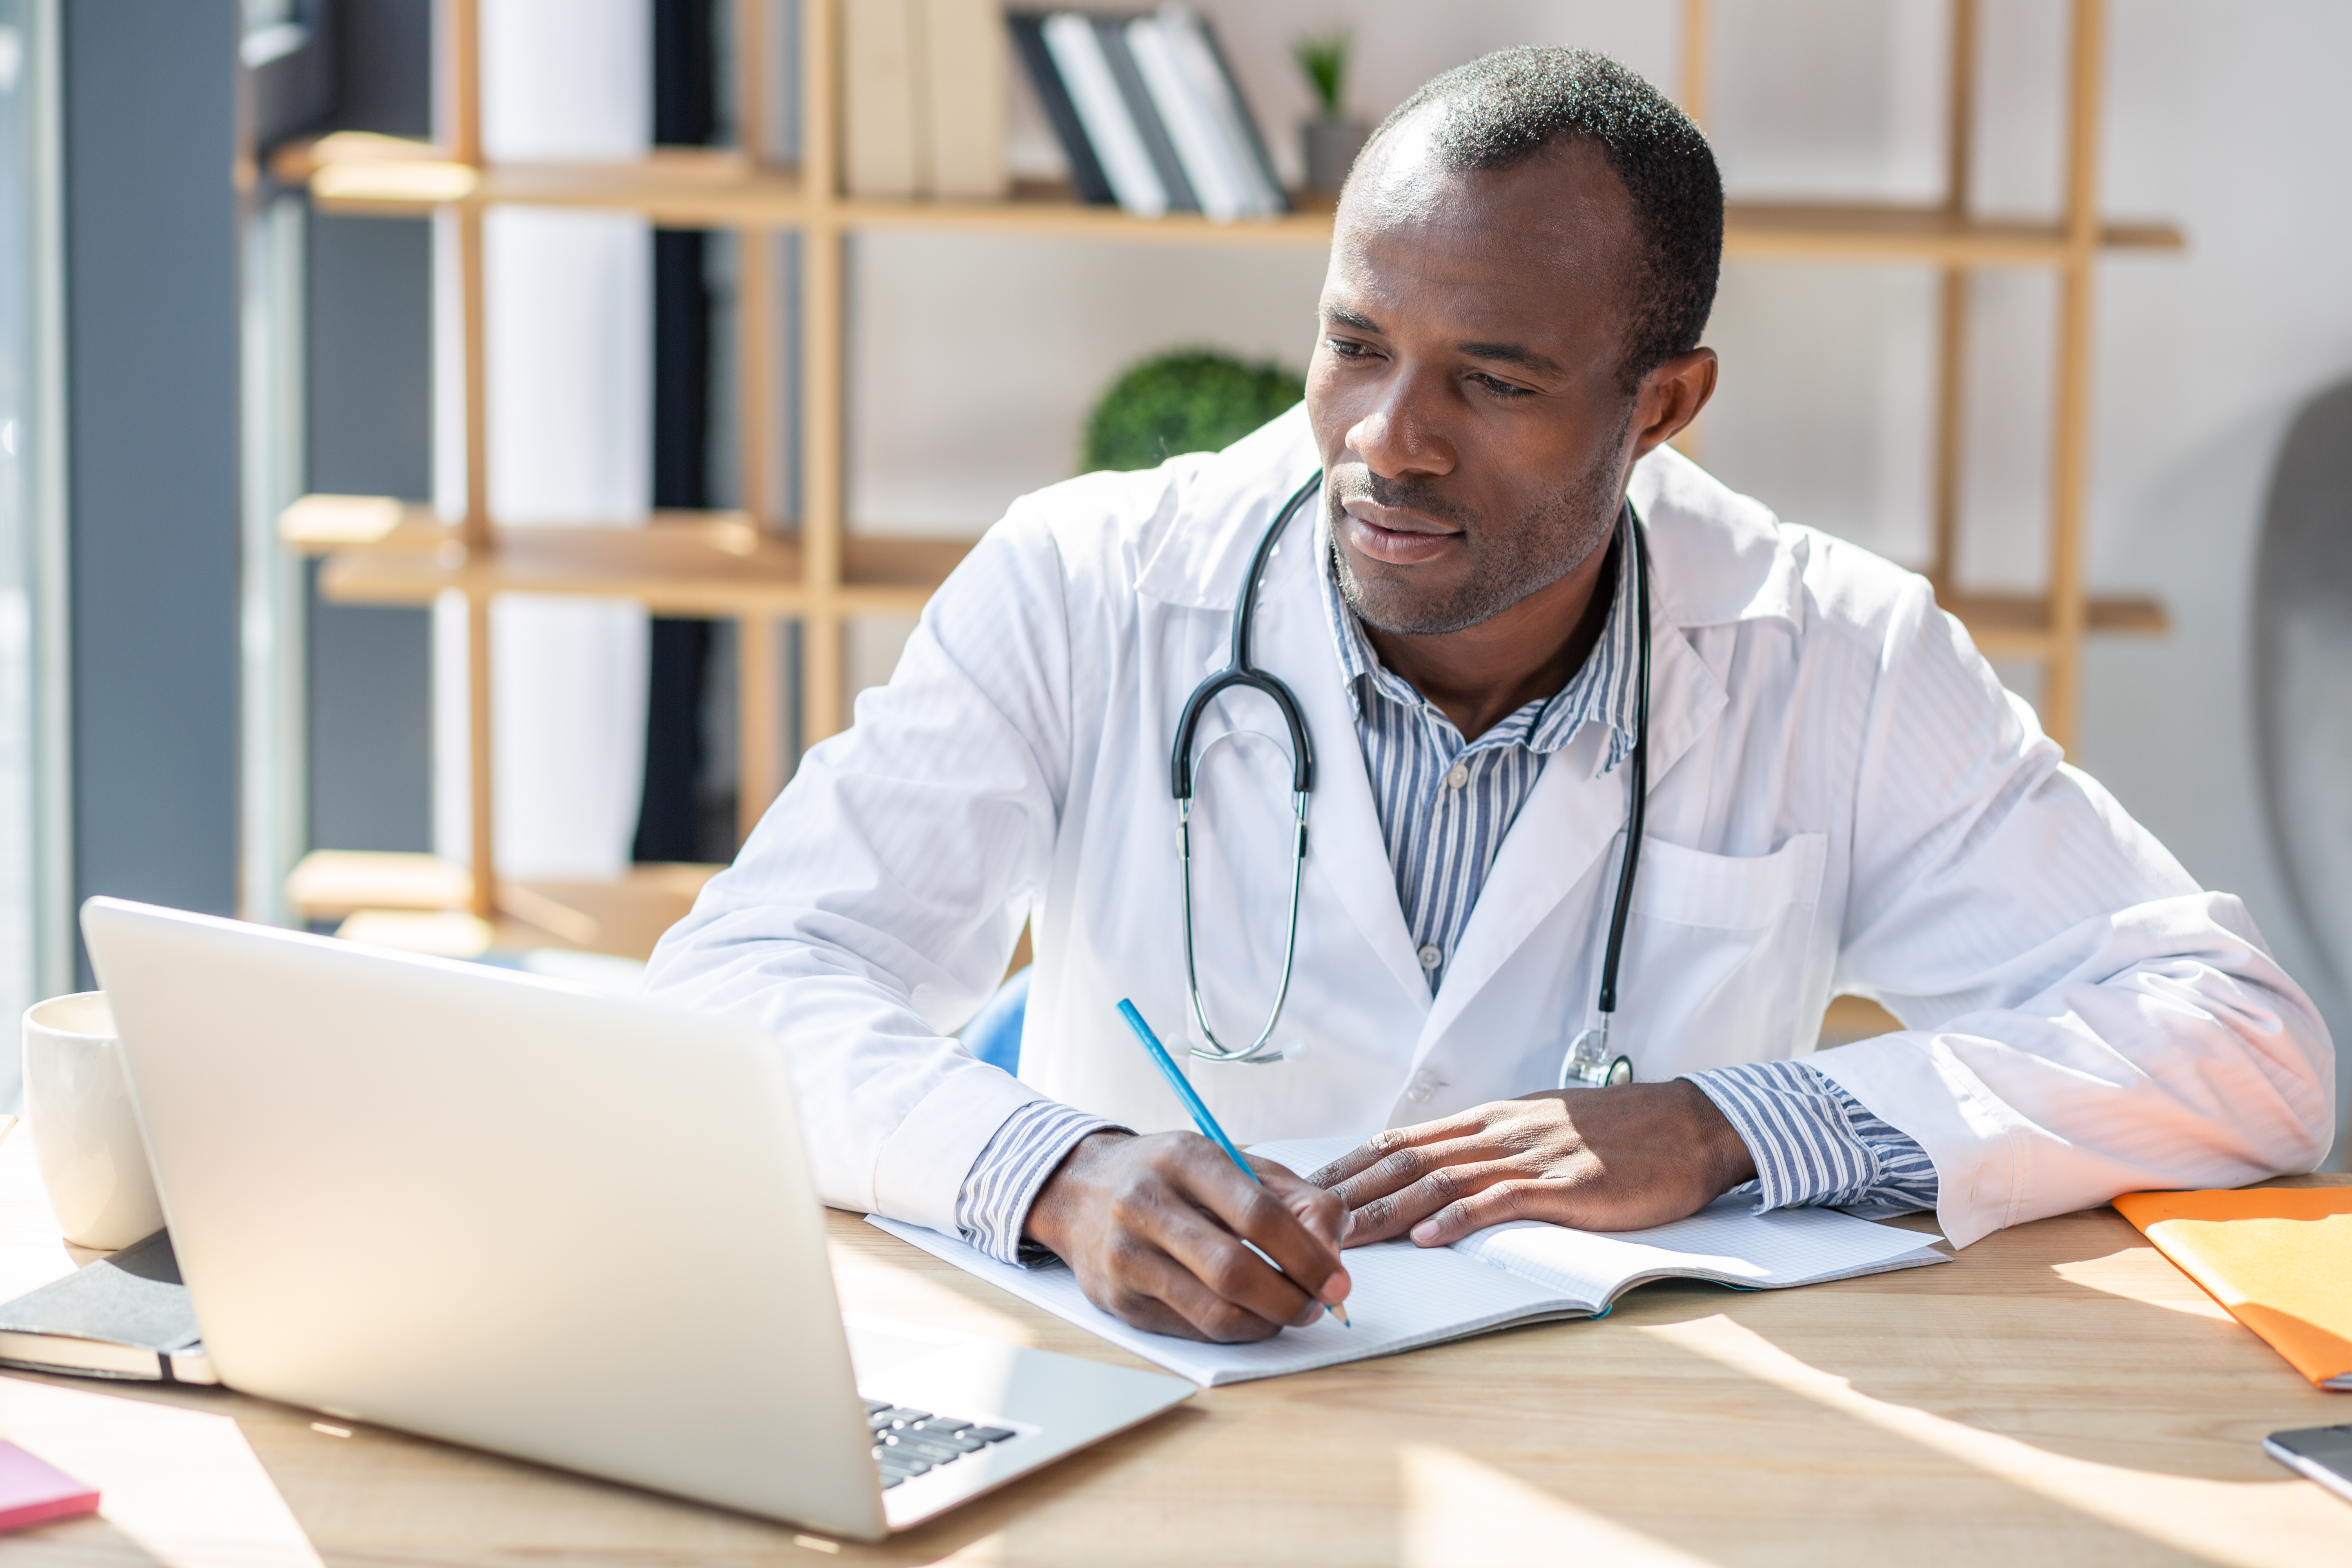 Physician looks at laptop and takes notes